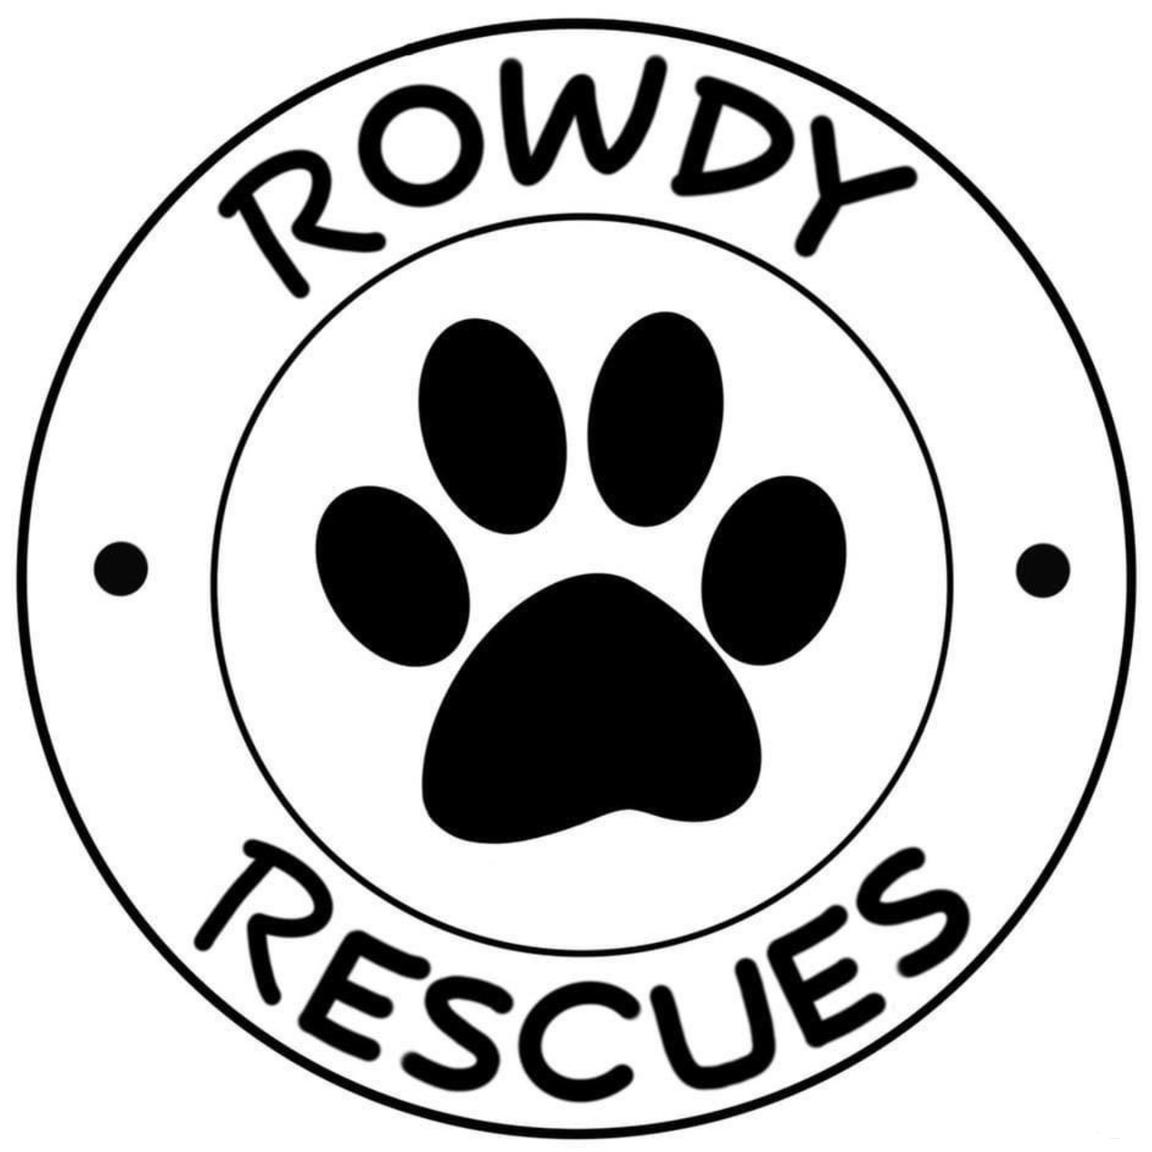 Rowdy Rescues